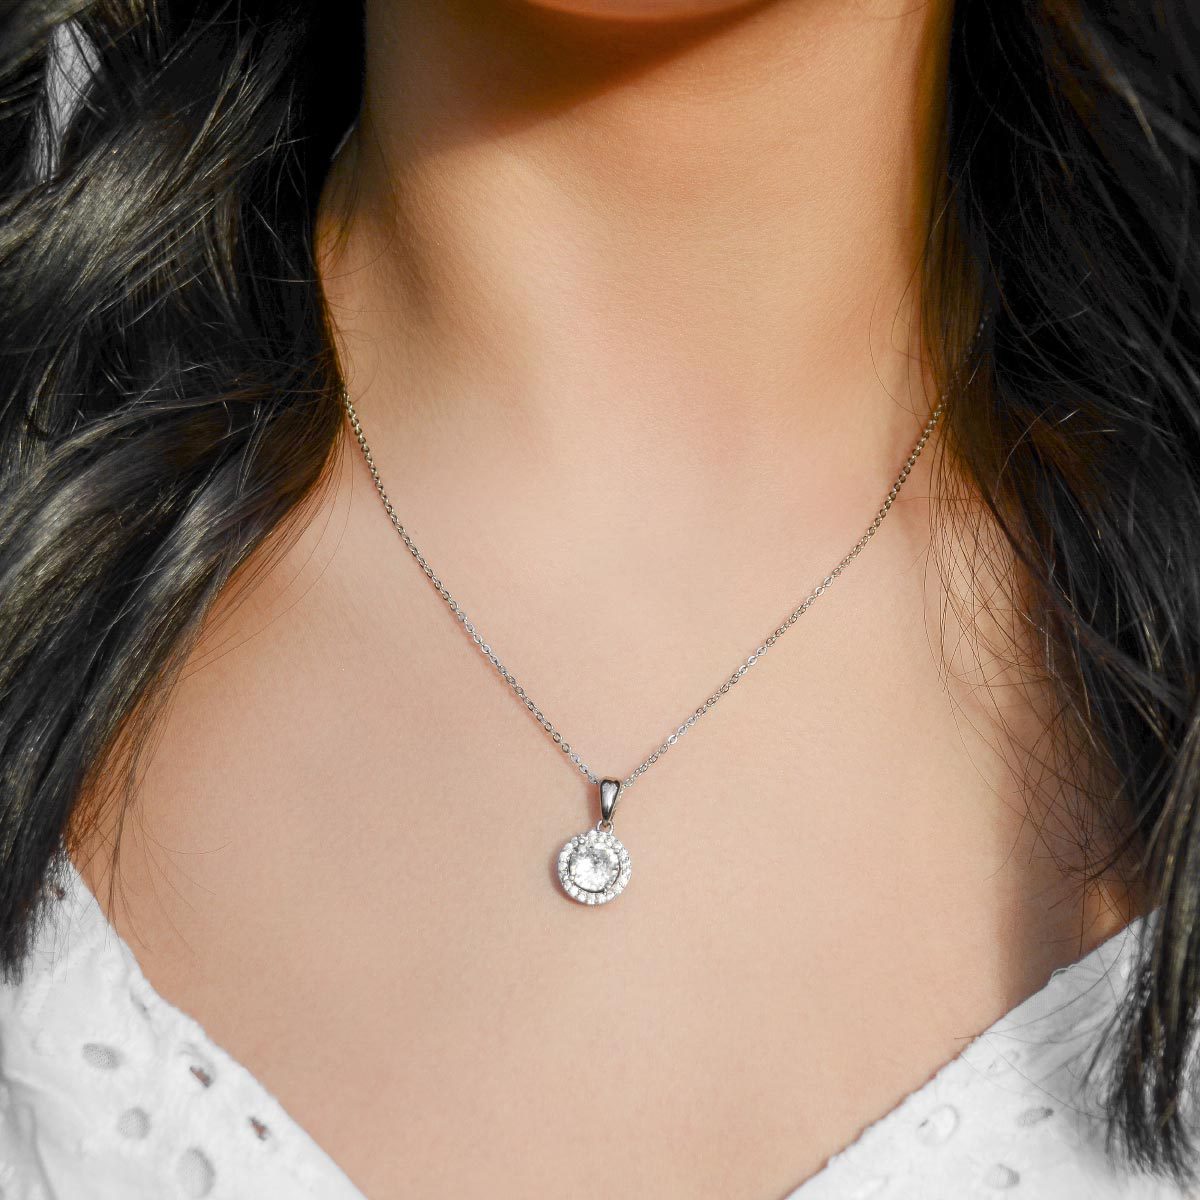 Happy Five Year Anniversary - Classique Sterling Silver Halo Pendant Necklace Gift Set